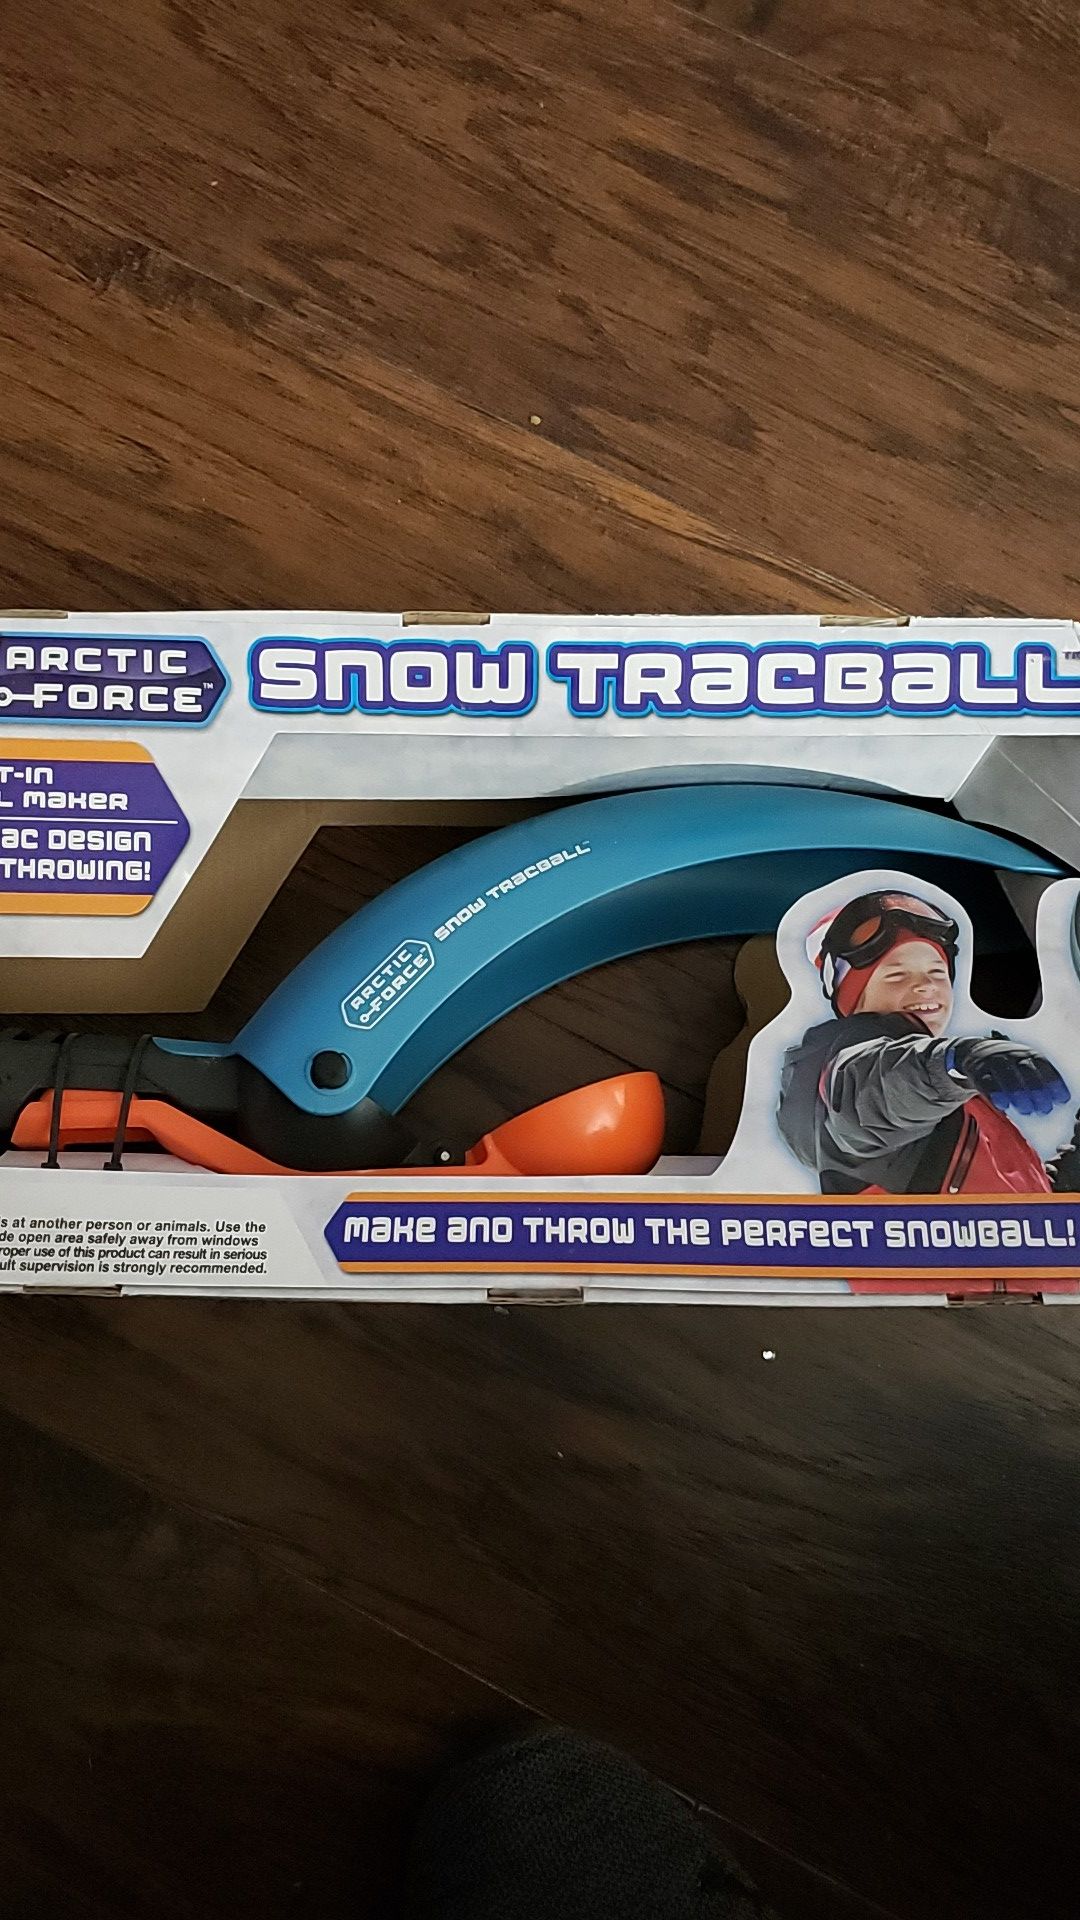 SNOW THROWING TOY